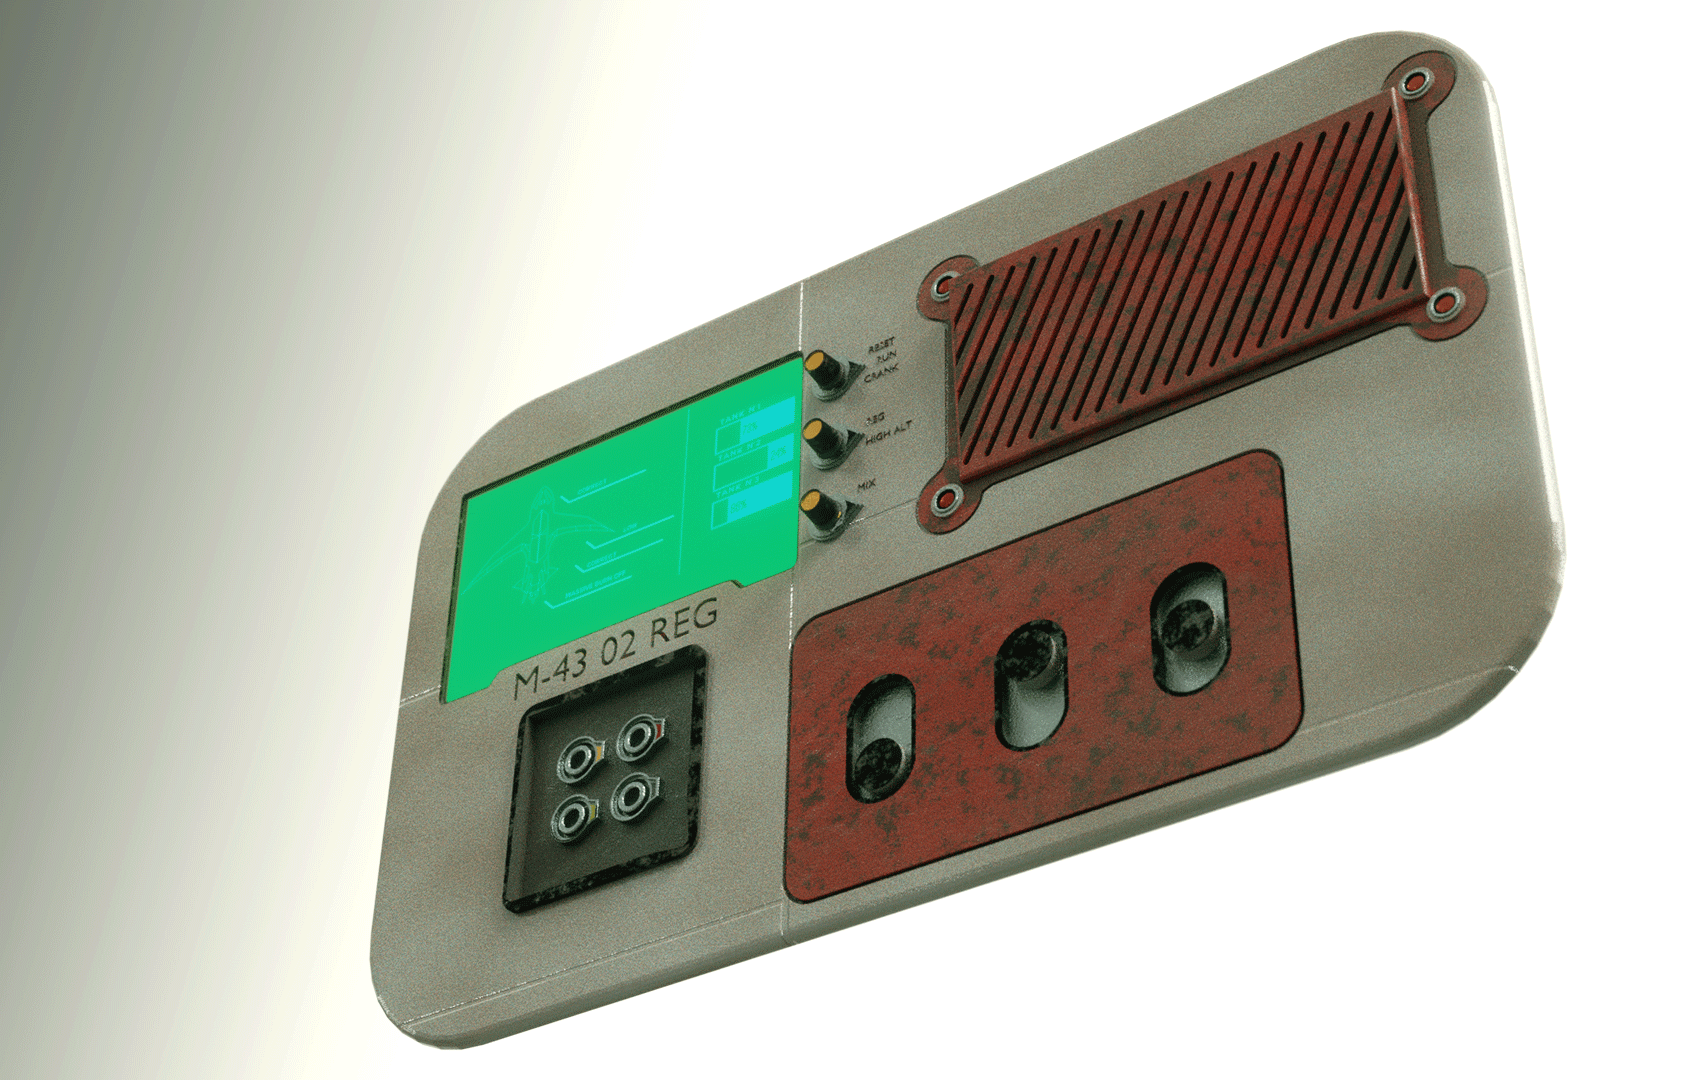 TXI-4400 Air Master Regulation Unit - A Sci Fi Console preview image 3